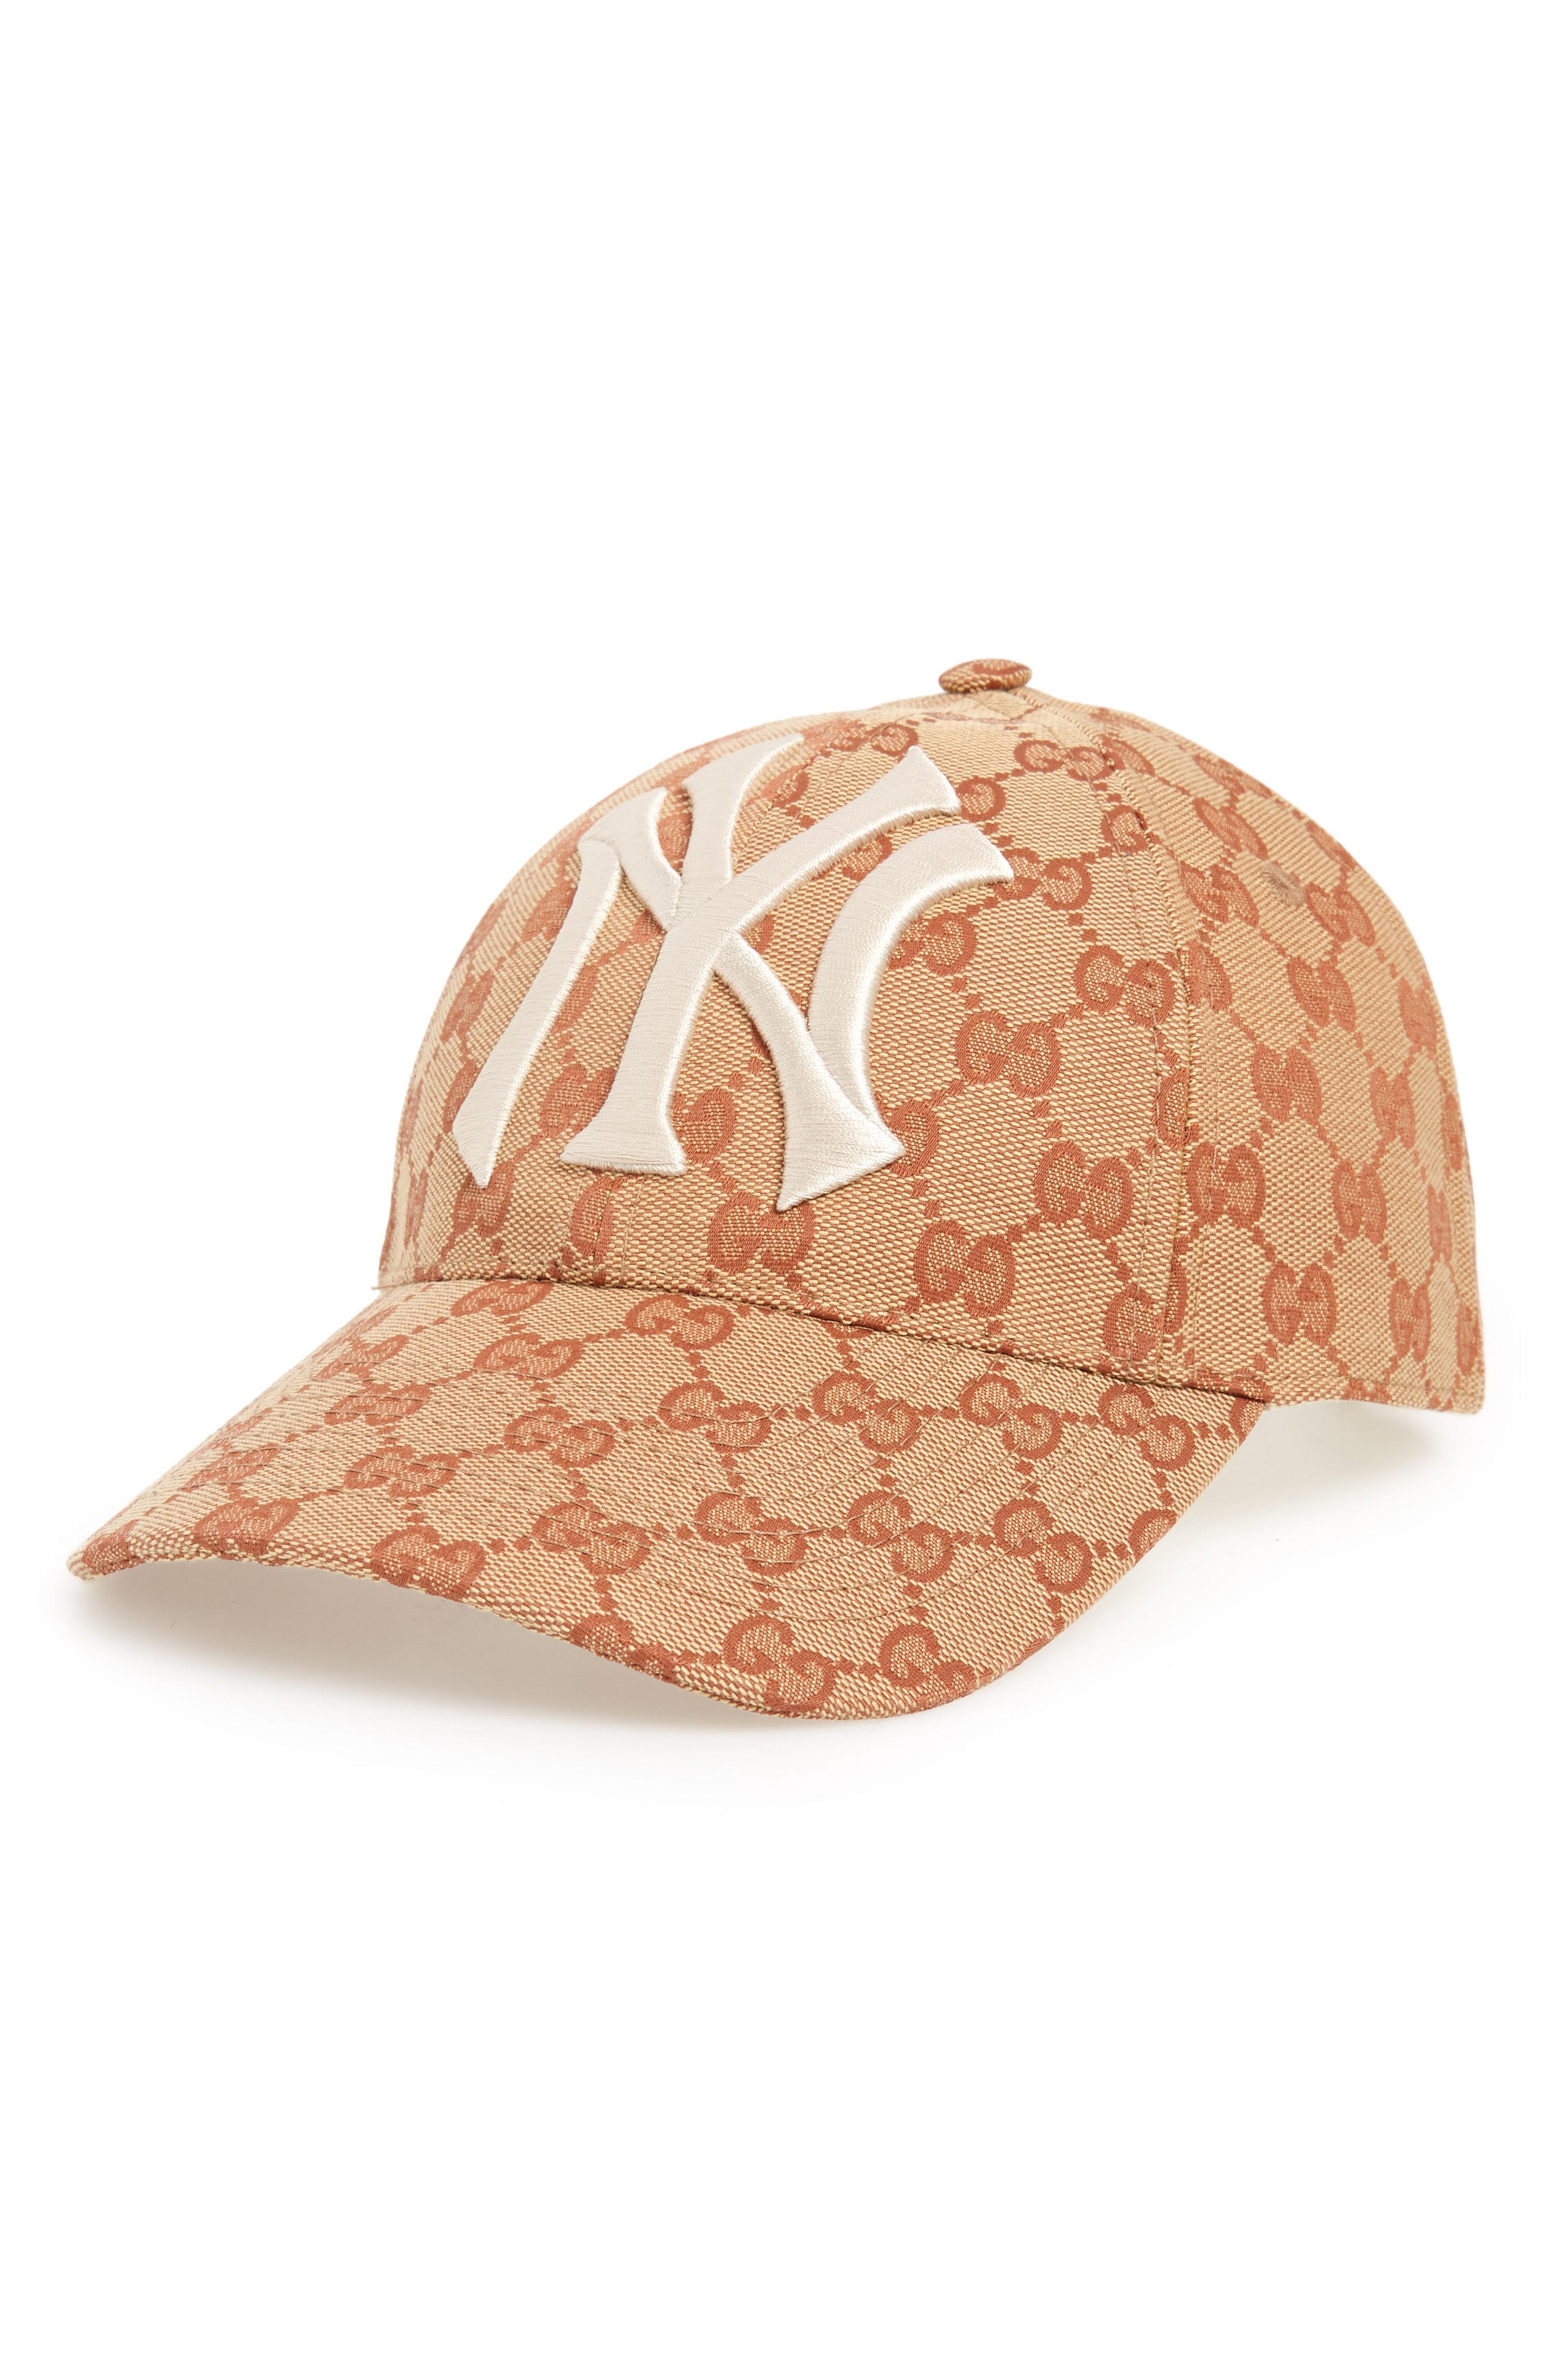 ny yankees gucci hat, OFF 79%,www 